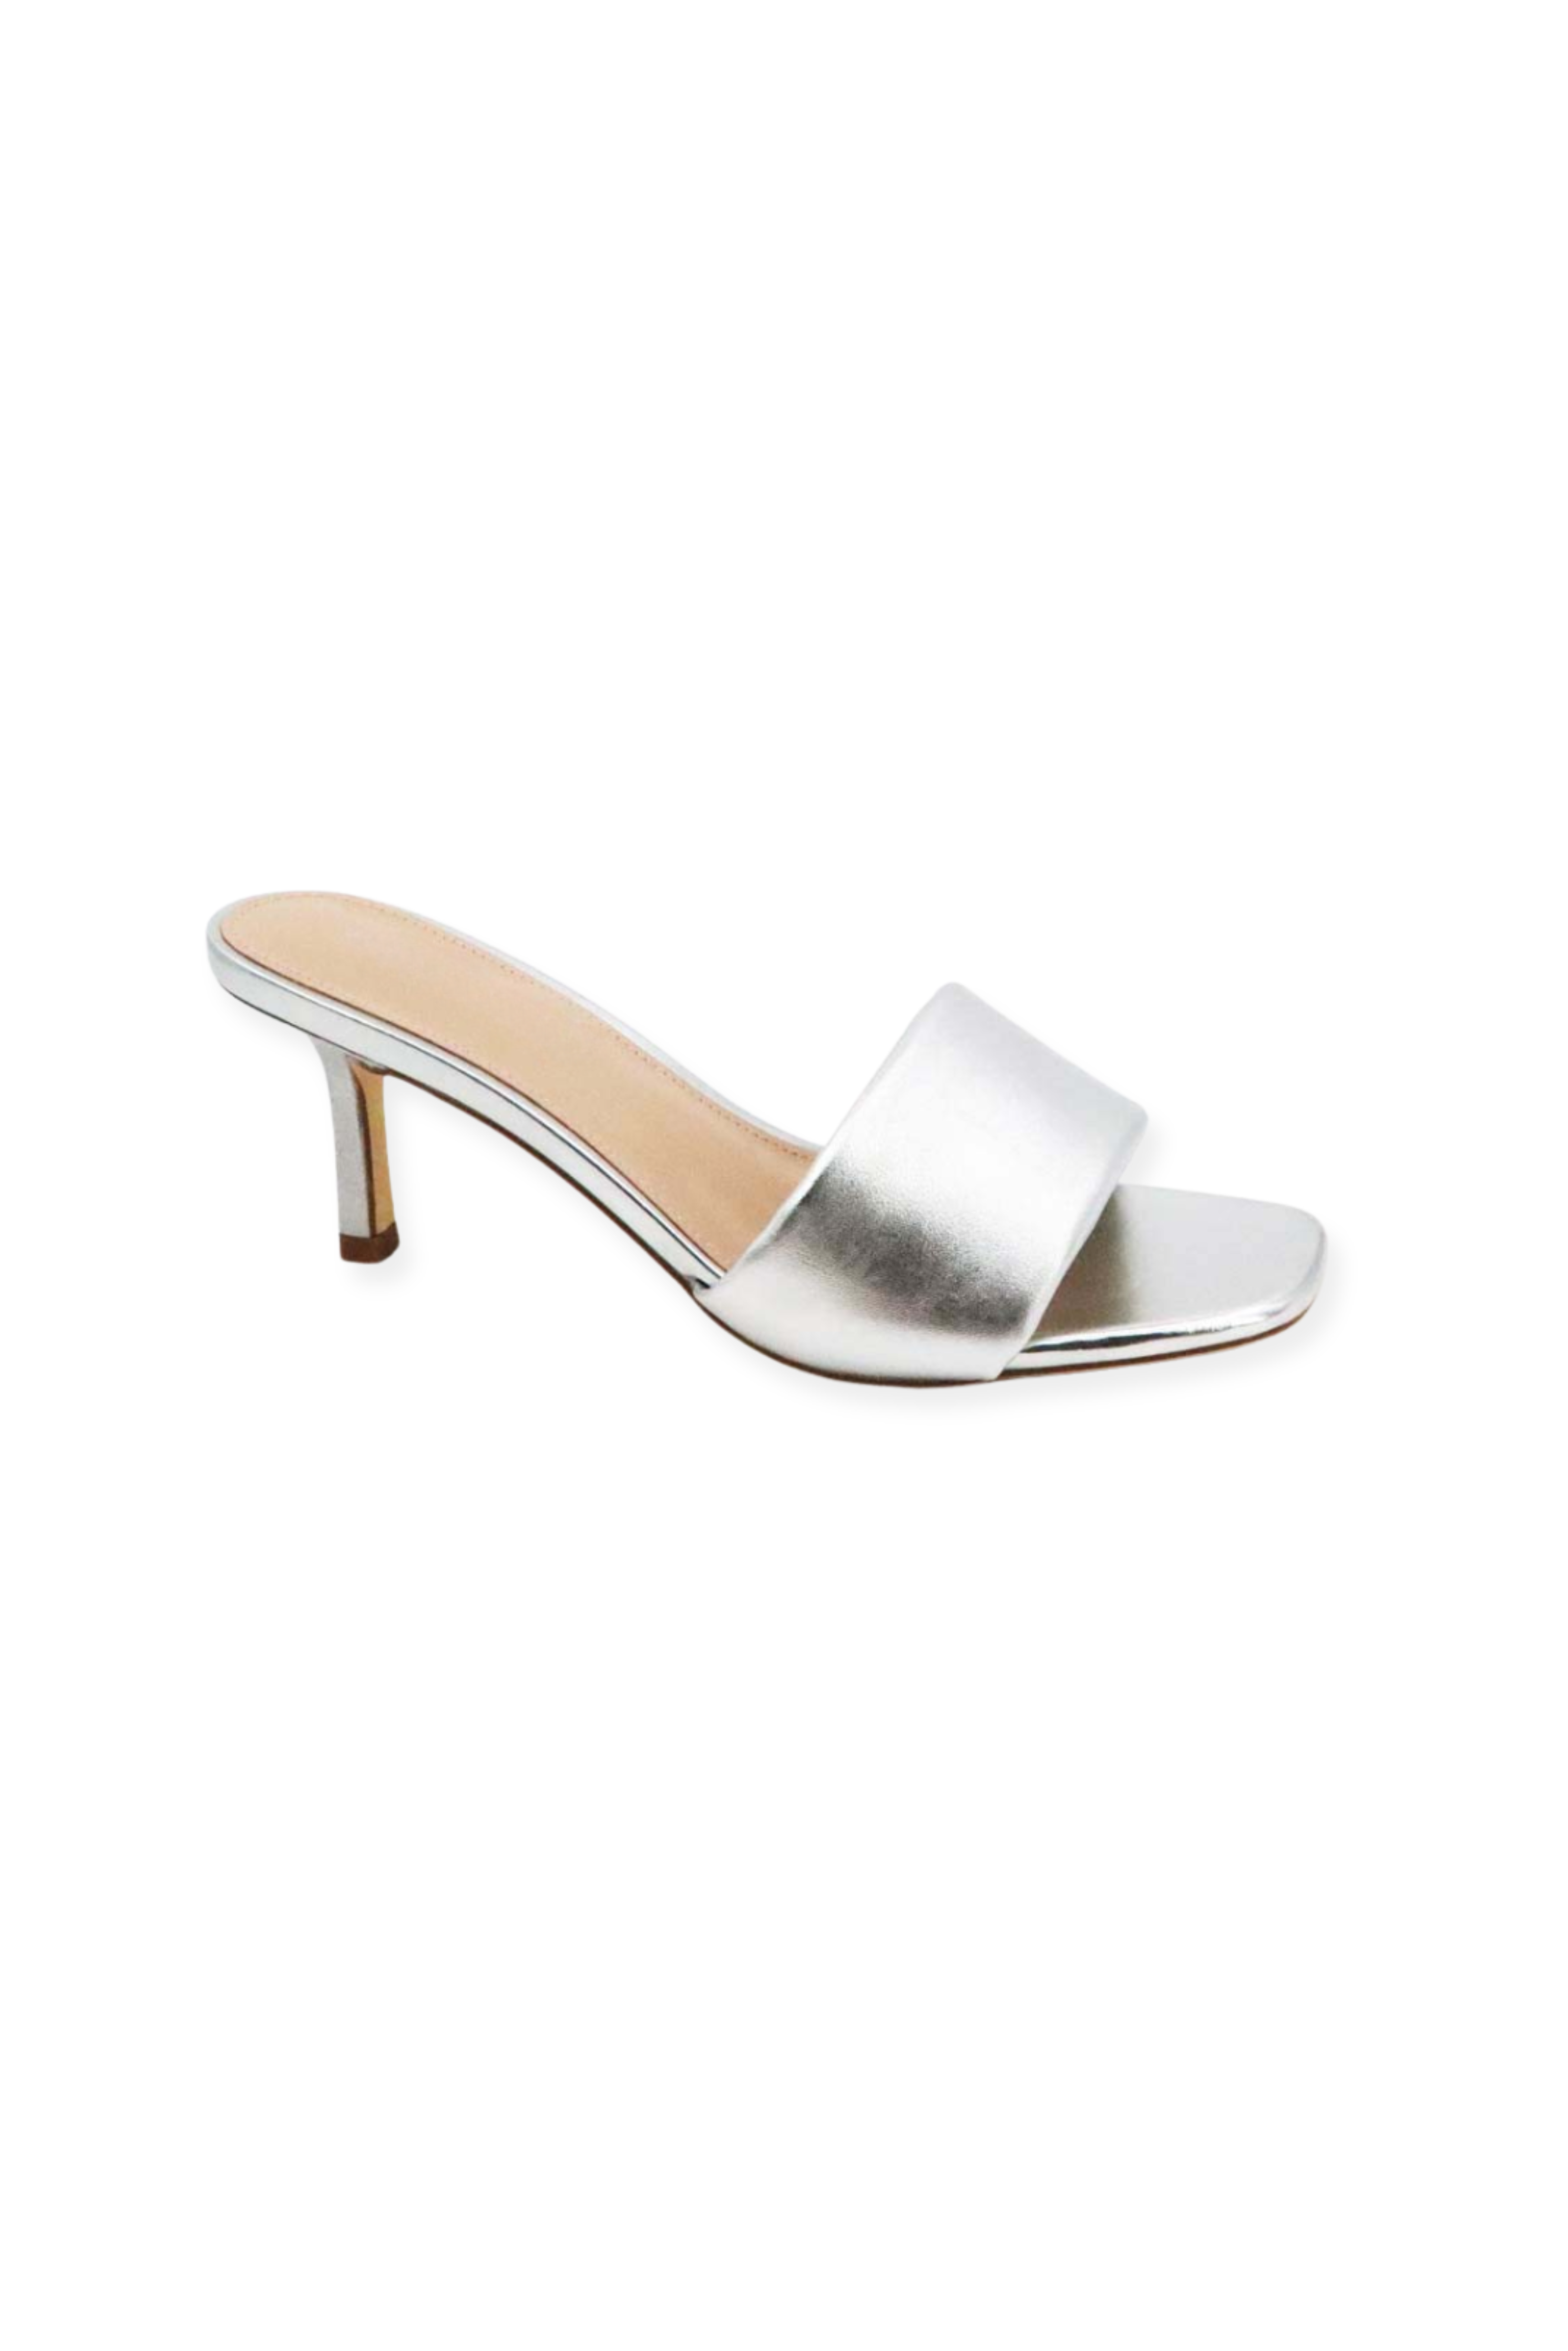 Go For The Silver Heel